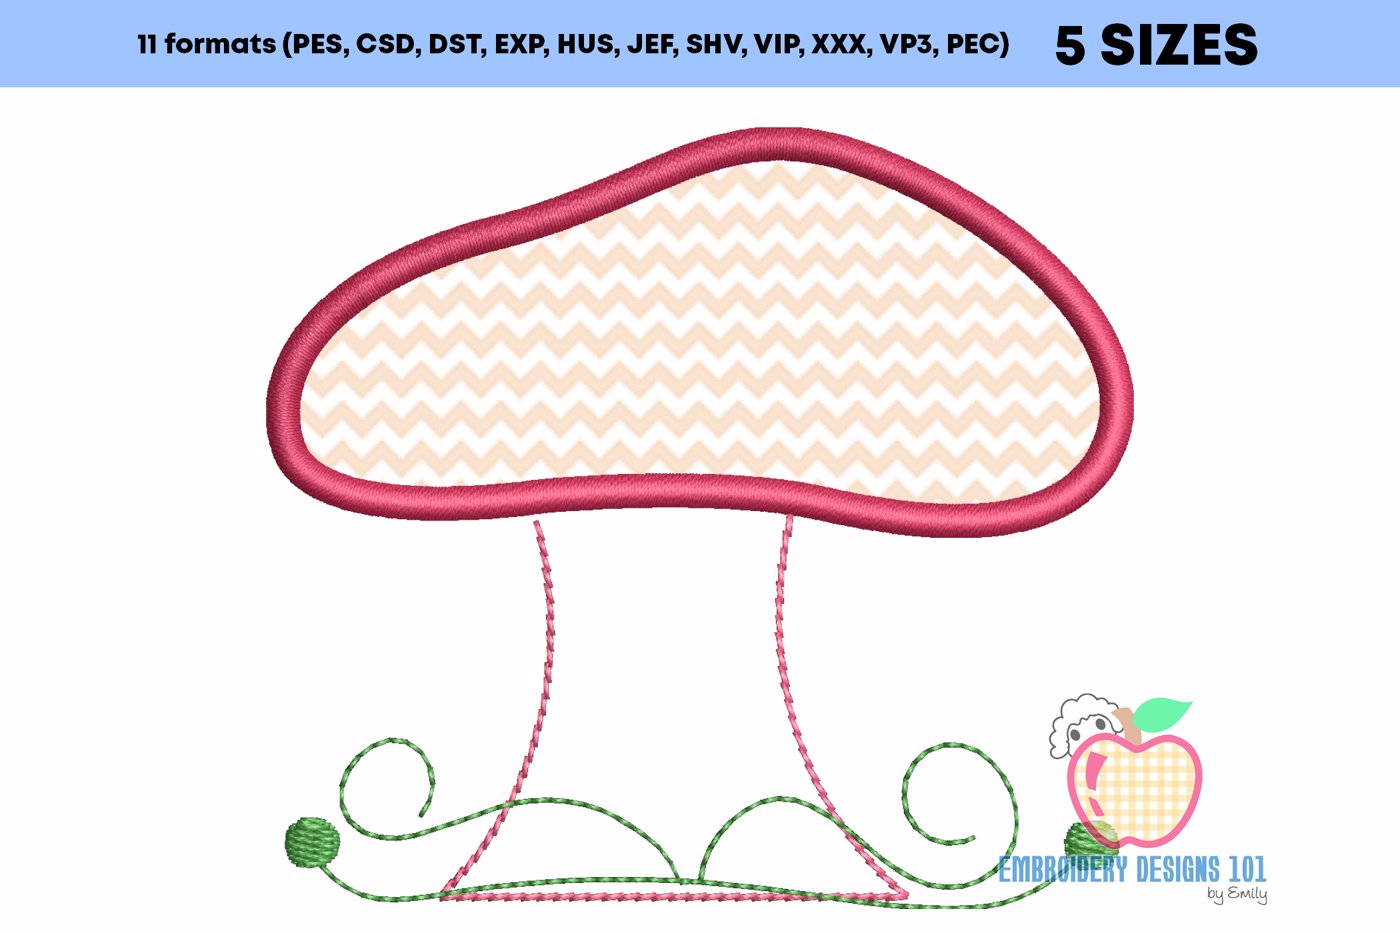 The Mushroom With The Designs Applique Pattern